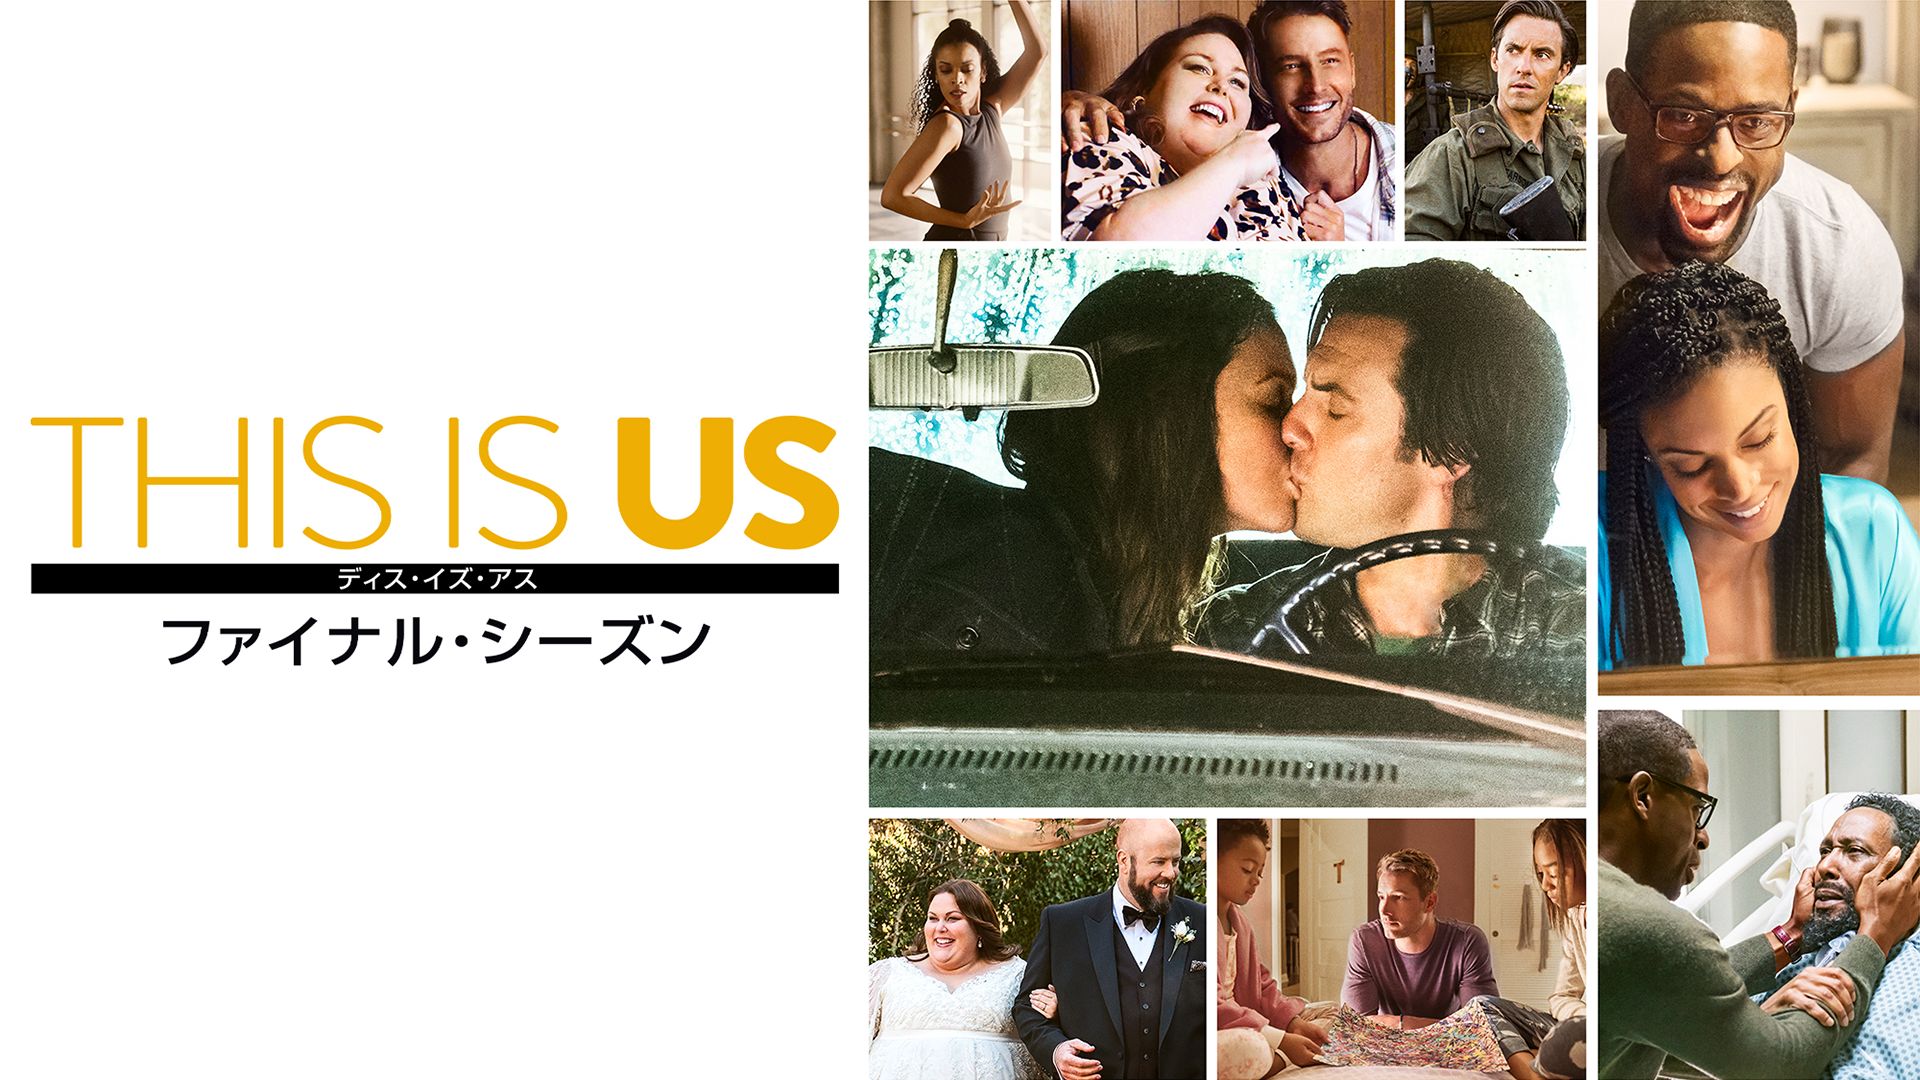 THIS IS US/ディス・イズ・アス ファイナル・シーズン